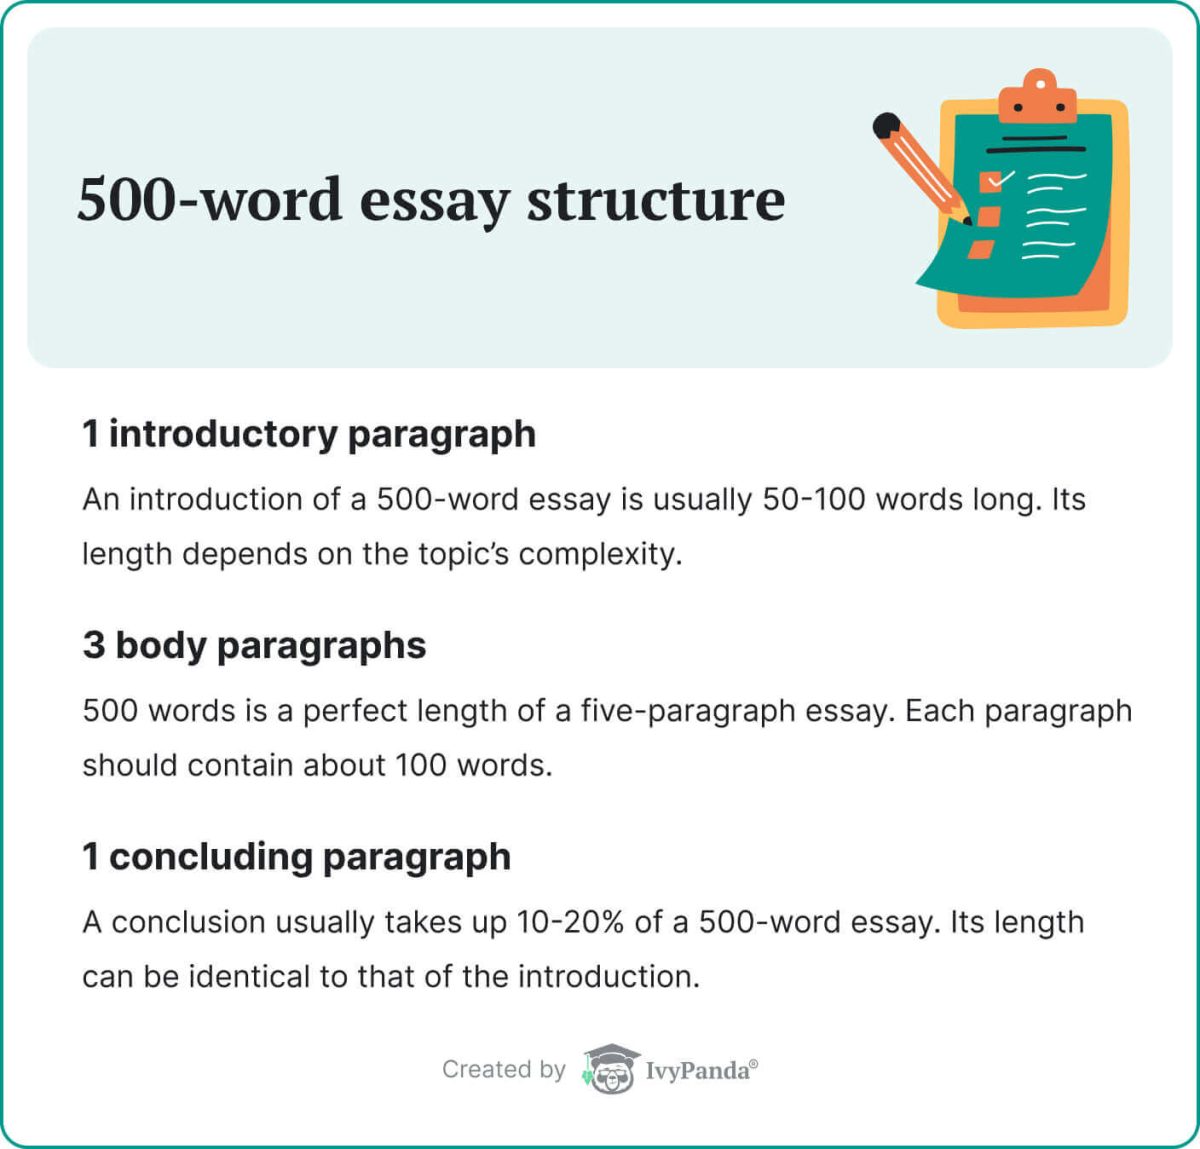 An explanation of a 500-word essay structure.